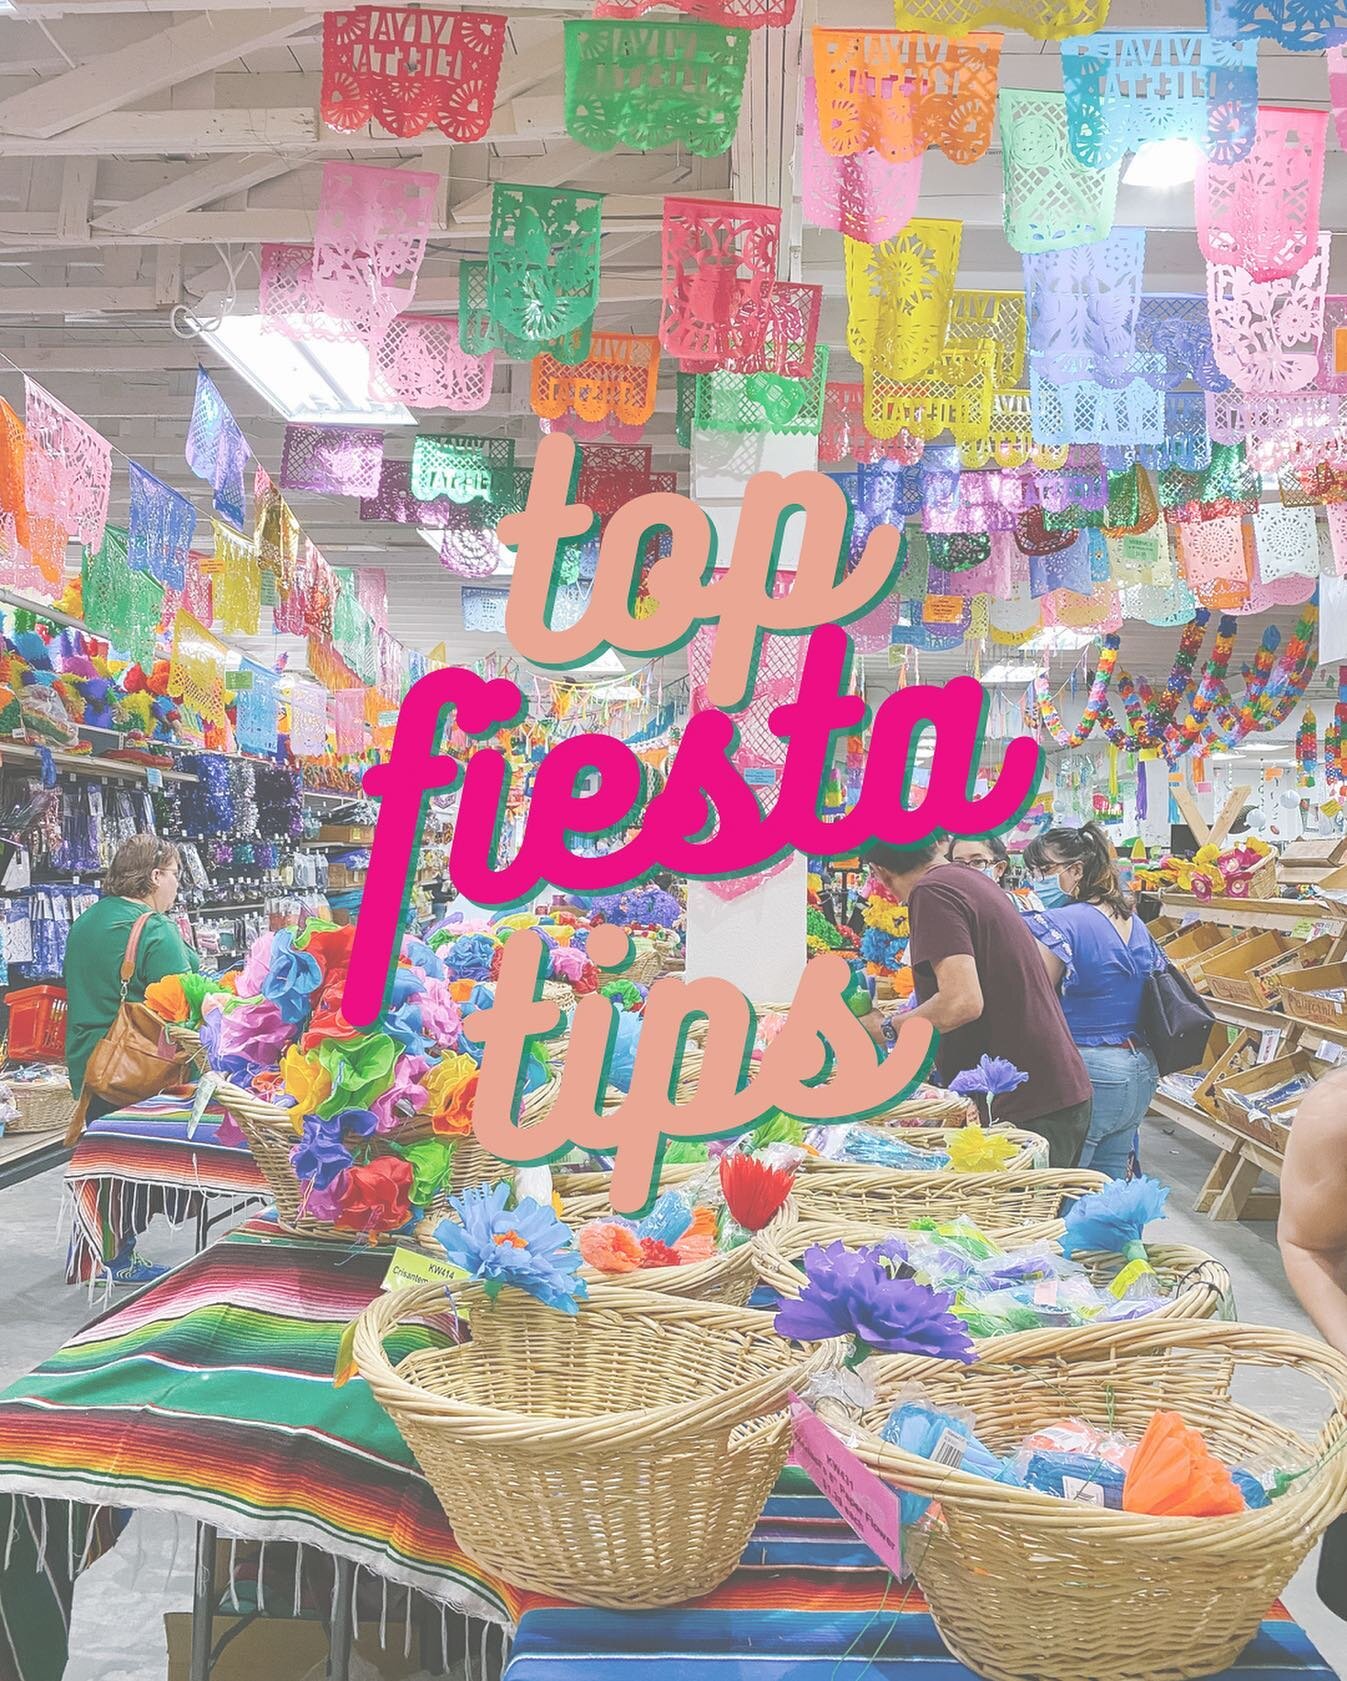 EEEE!! It&rsquo;s the most wonderful time of the year! FIESTA IS JUST AROUND THE CORNER 🎉

It&rsquo;s earlier this year&hellip;so, are you prepared? Here are my top 5 tips to make sure you&rsquo;re ready:

1) Plan which events you&rsquo;re going to 